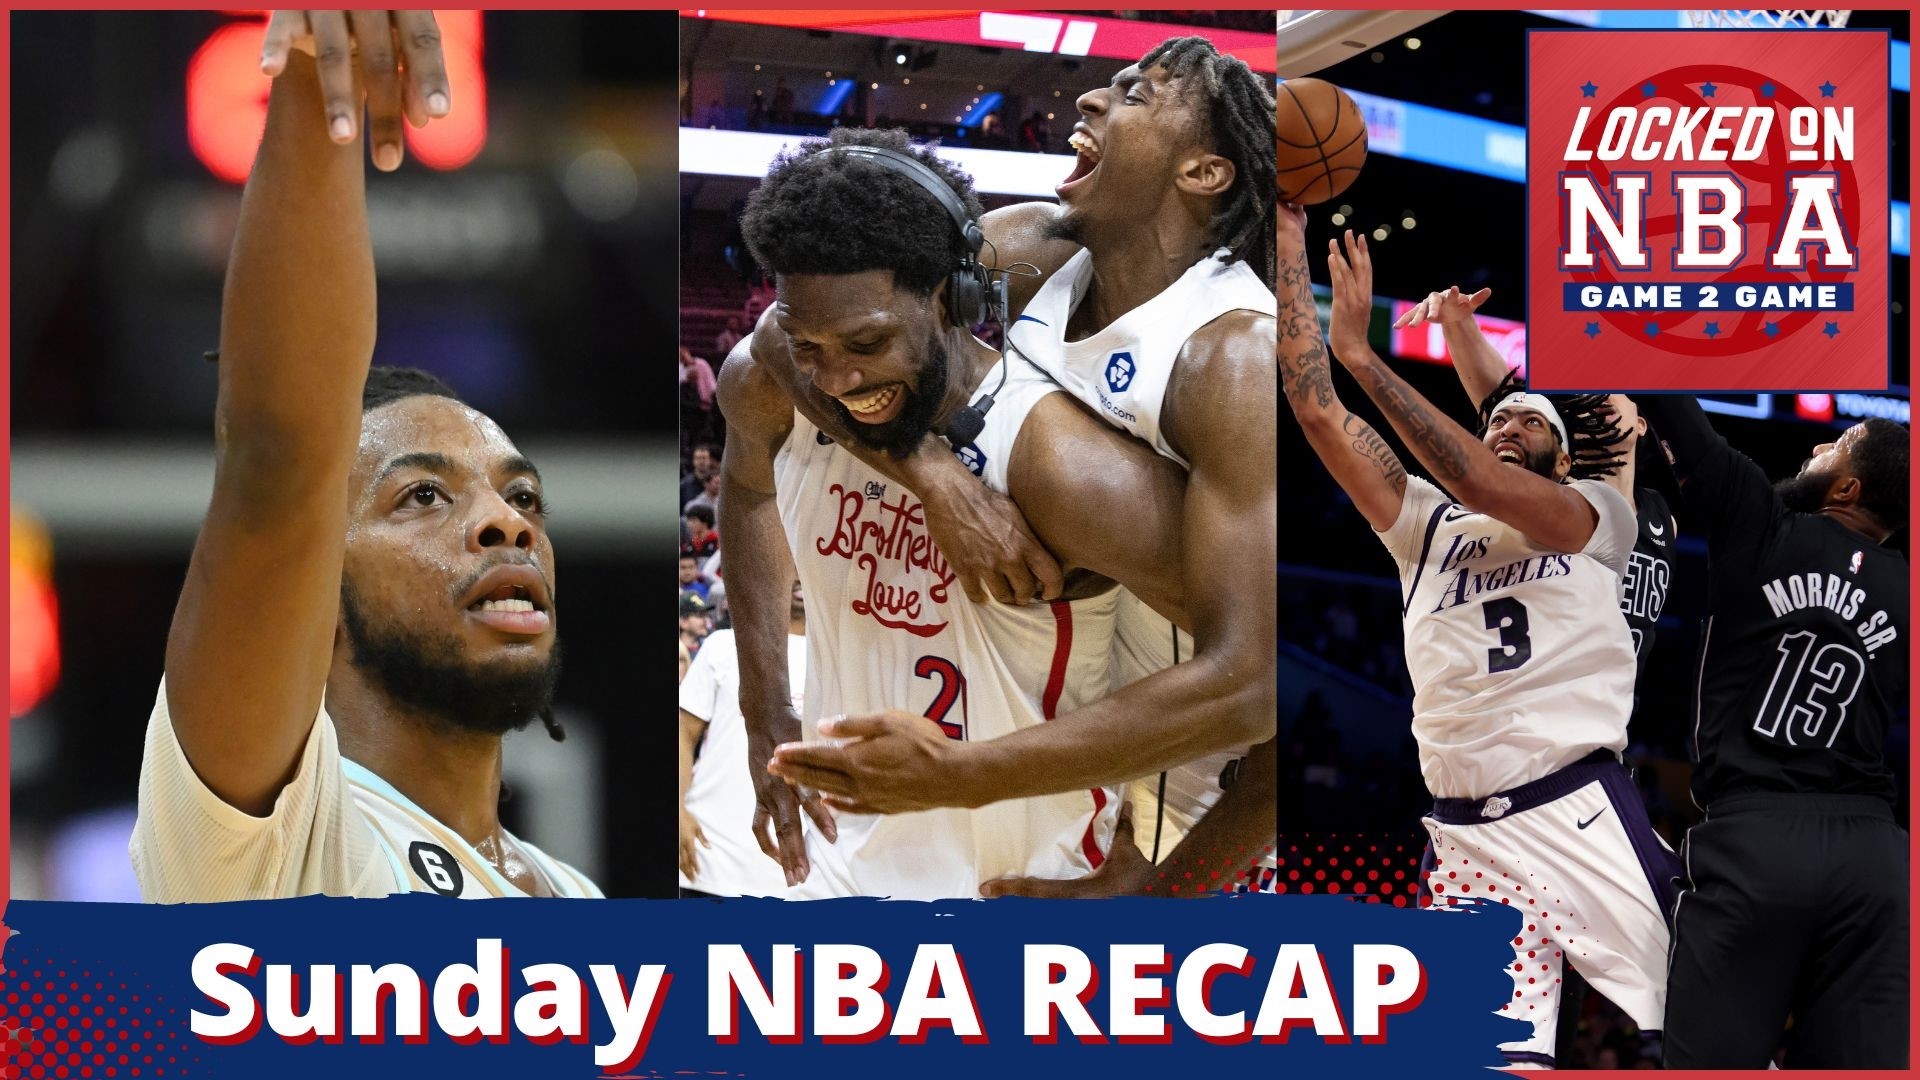 The Timberwolves get passed the Cavs on the road, Oklahoma Thunder shoot the lights out and more big headlines from the NBA.